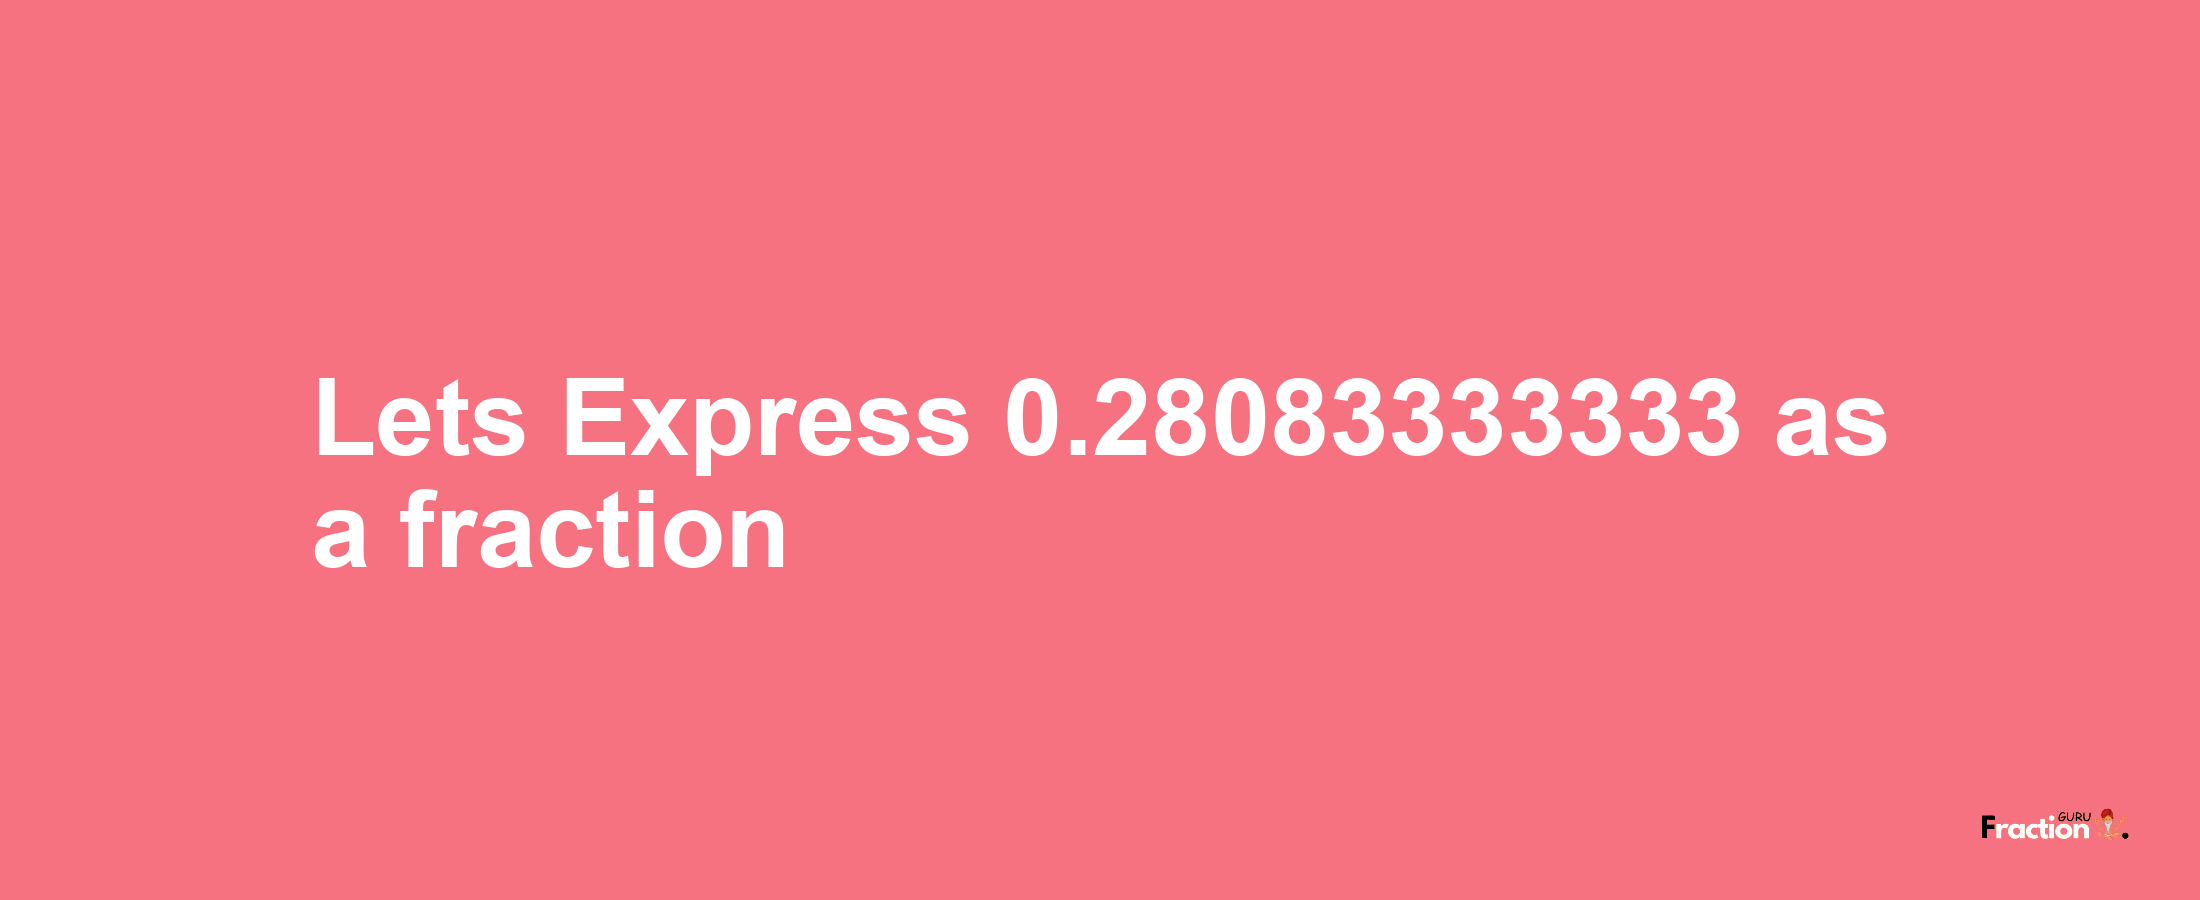 Lets Express 0.28083333333 as afraction